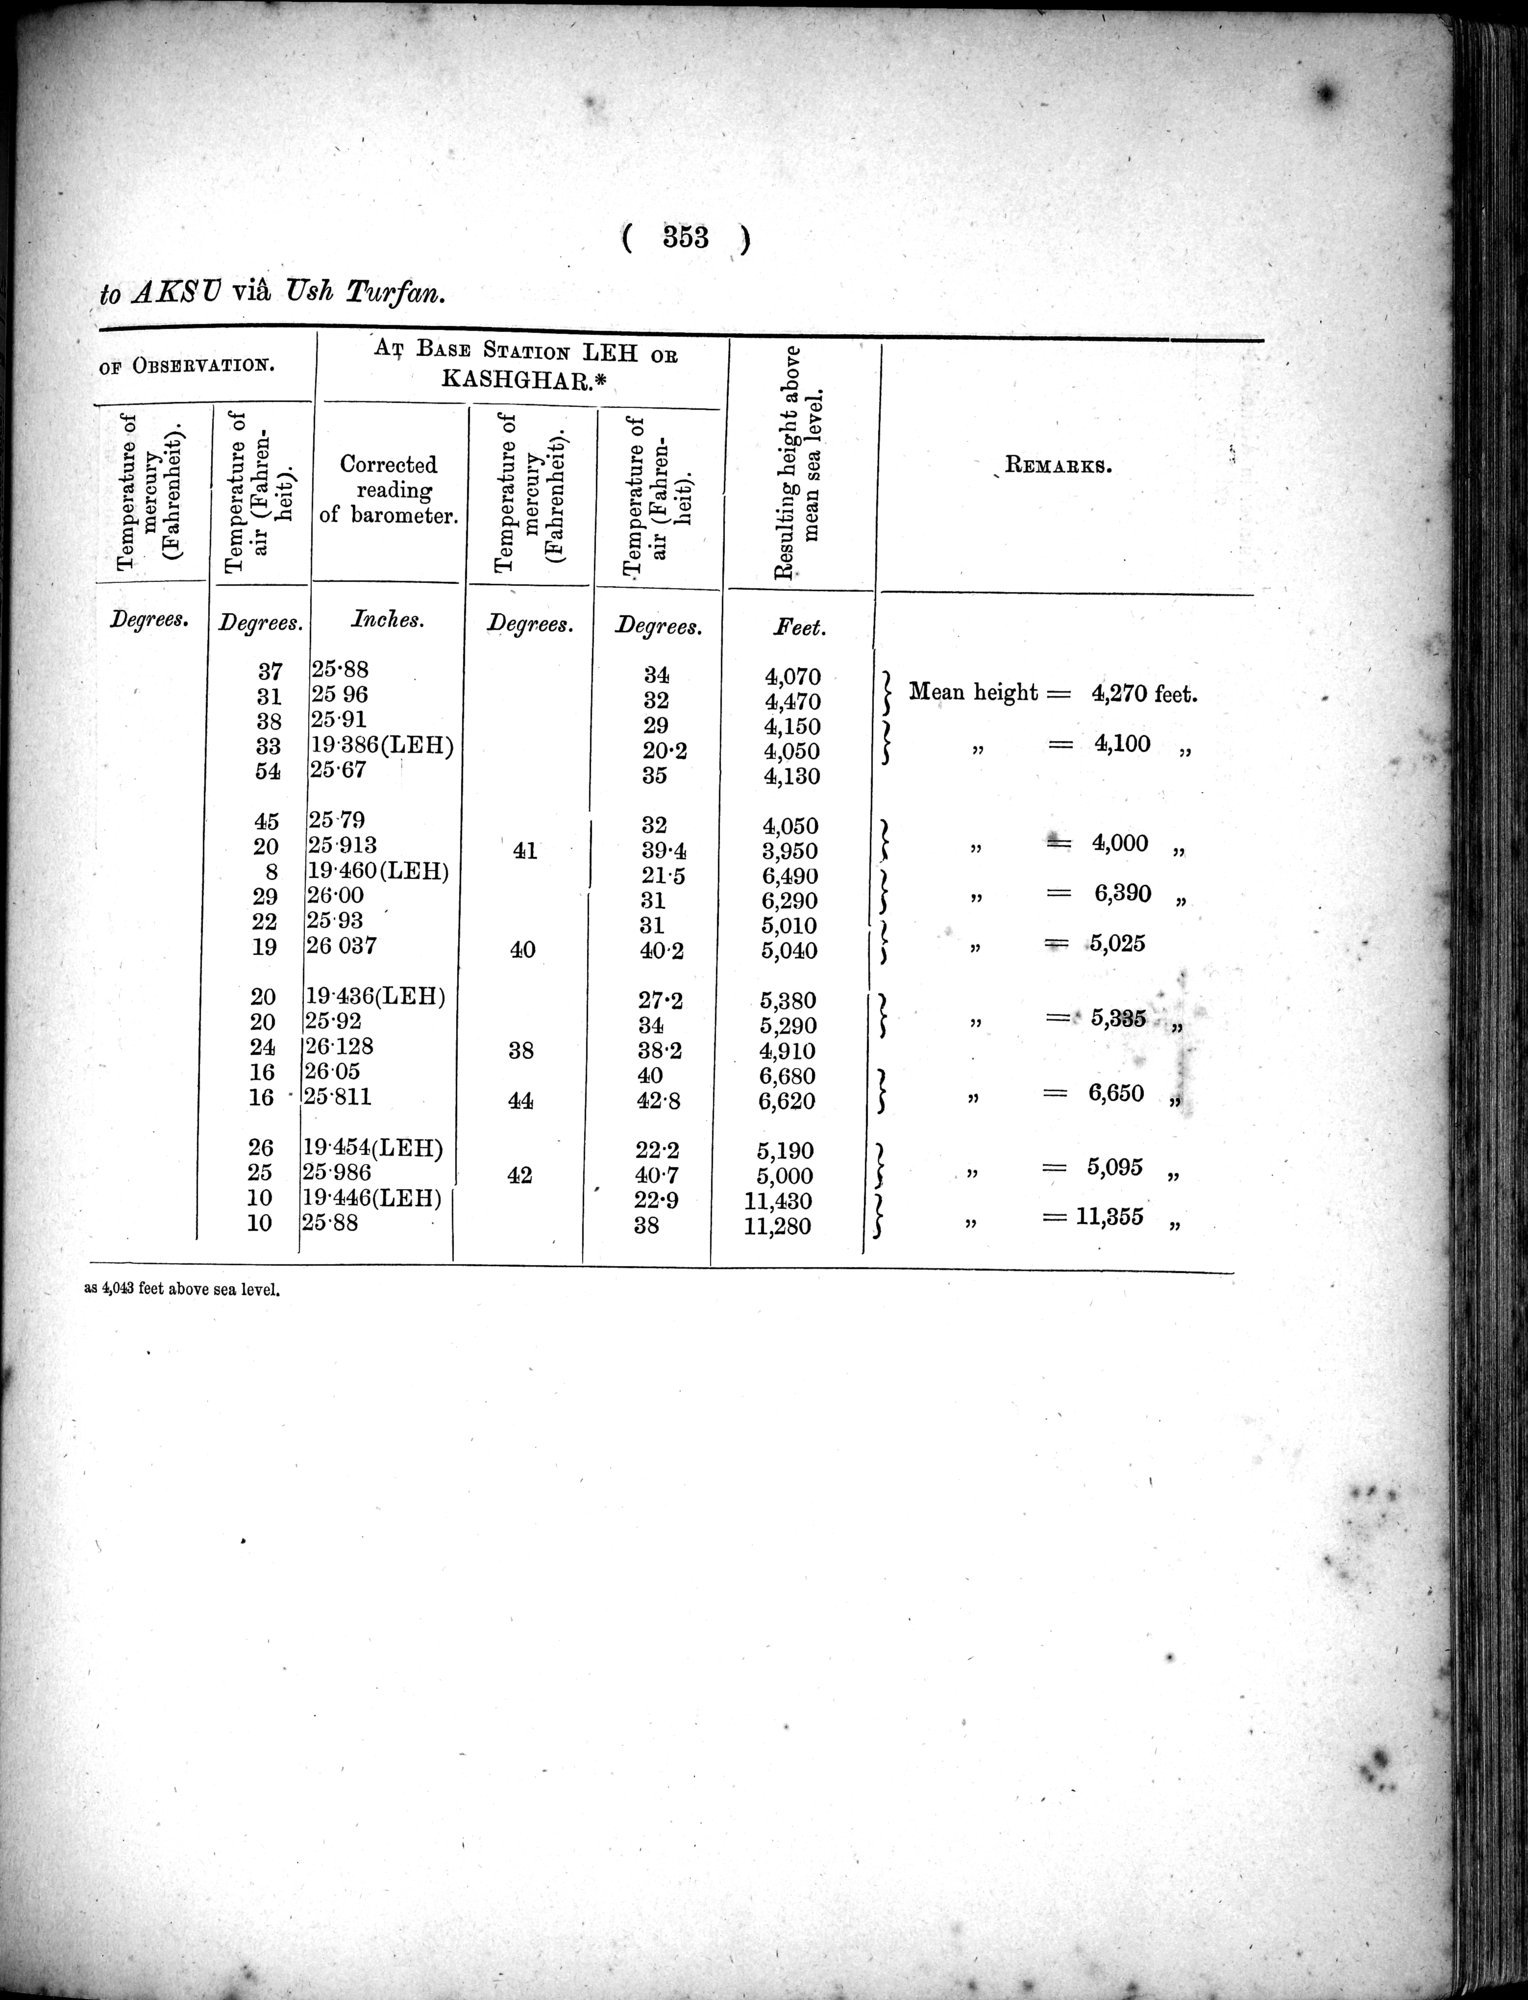 Report of a Mission to Yarkund in 1873 : vol.1 / Page 487 (Grayscale High Resolution Image)